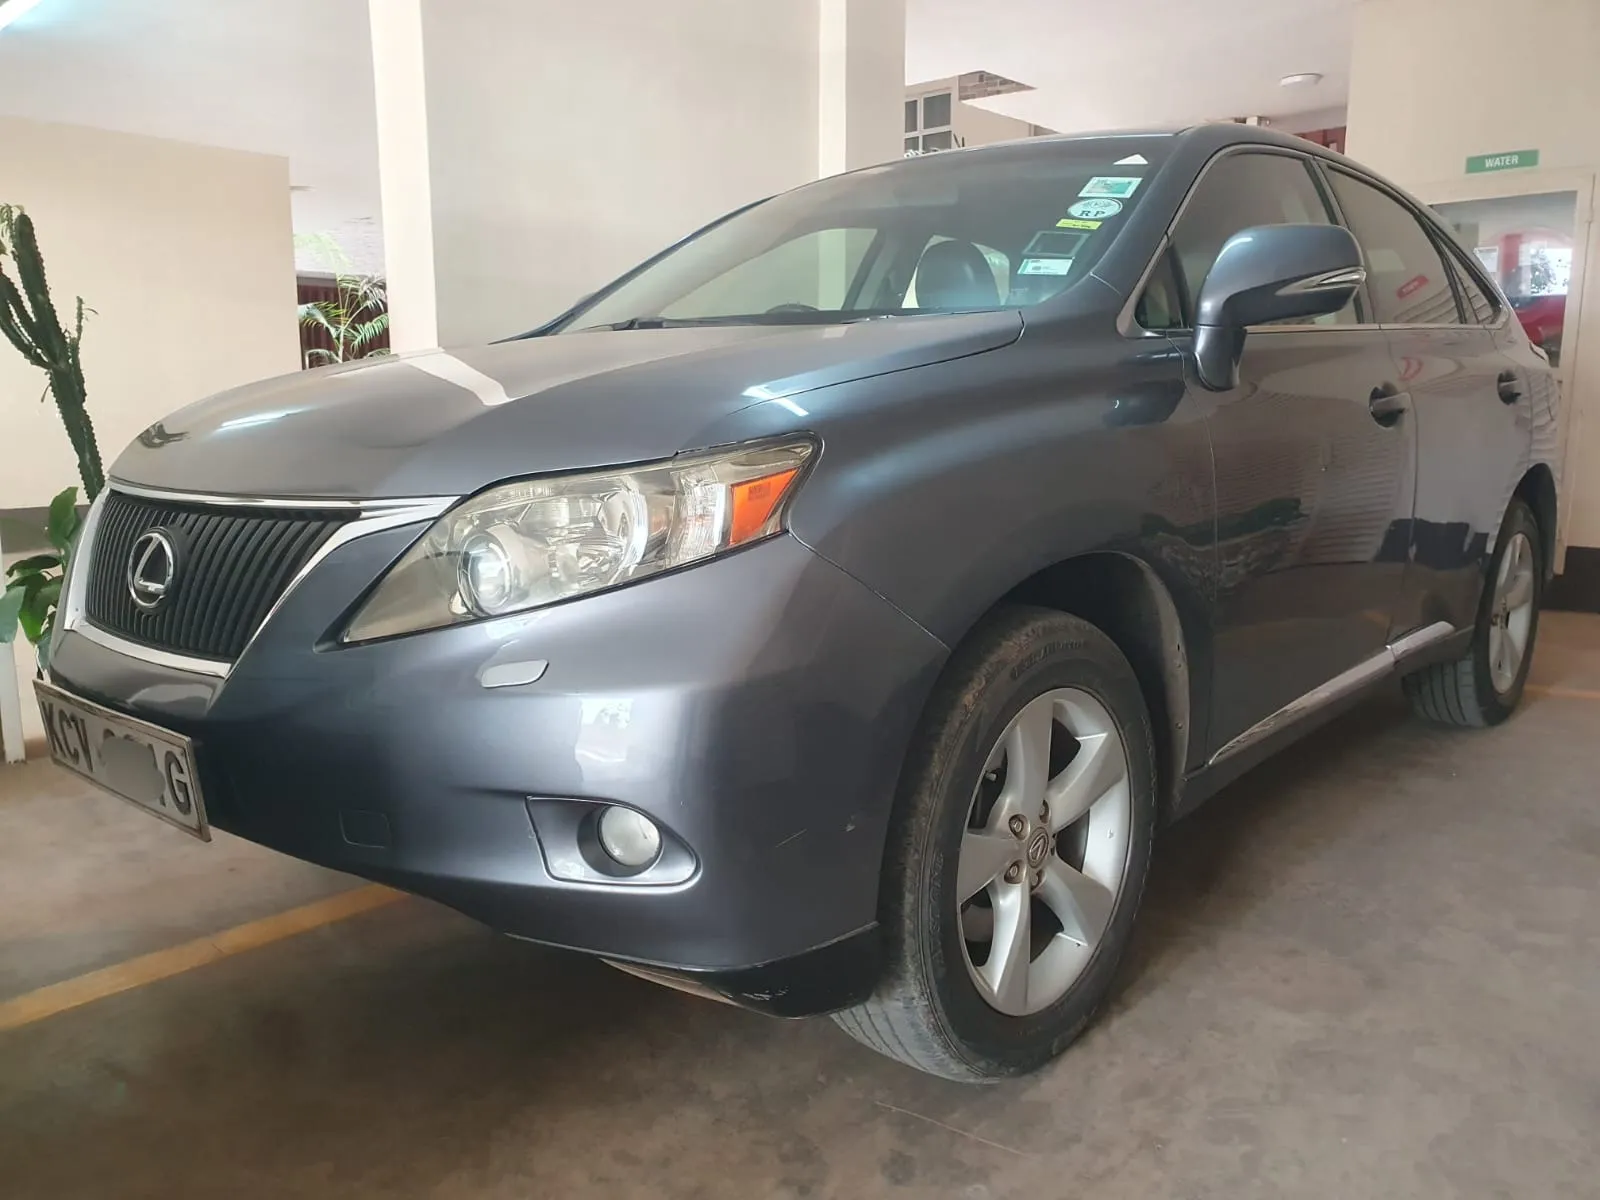 LEXUS RX 270 QUICK SALE ASIAN OWNER You Pay 30% Deposit Trade in OK EXCLUSIVE For Sale in Kenya Hire purchase installments as New